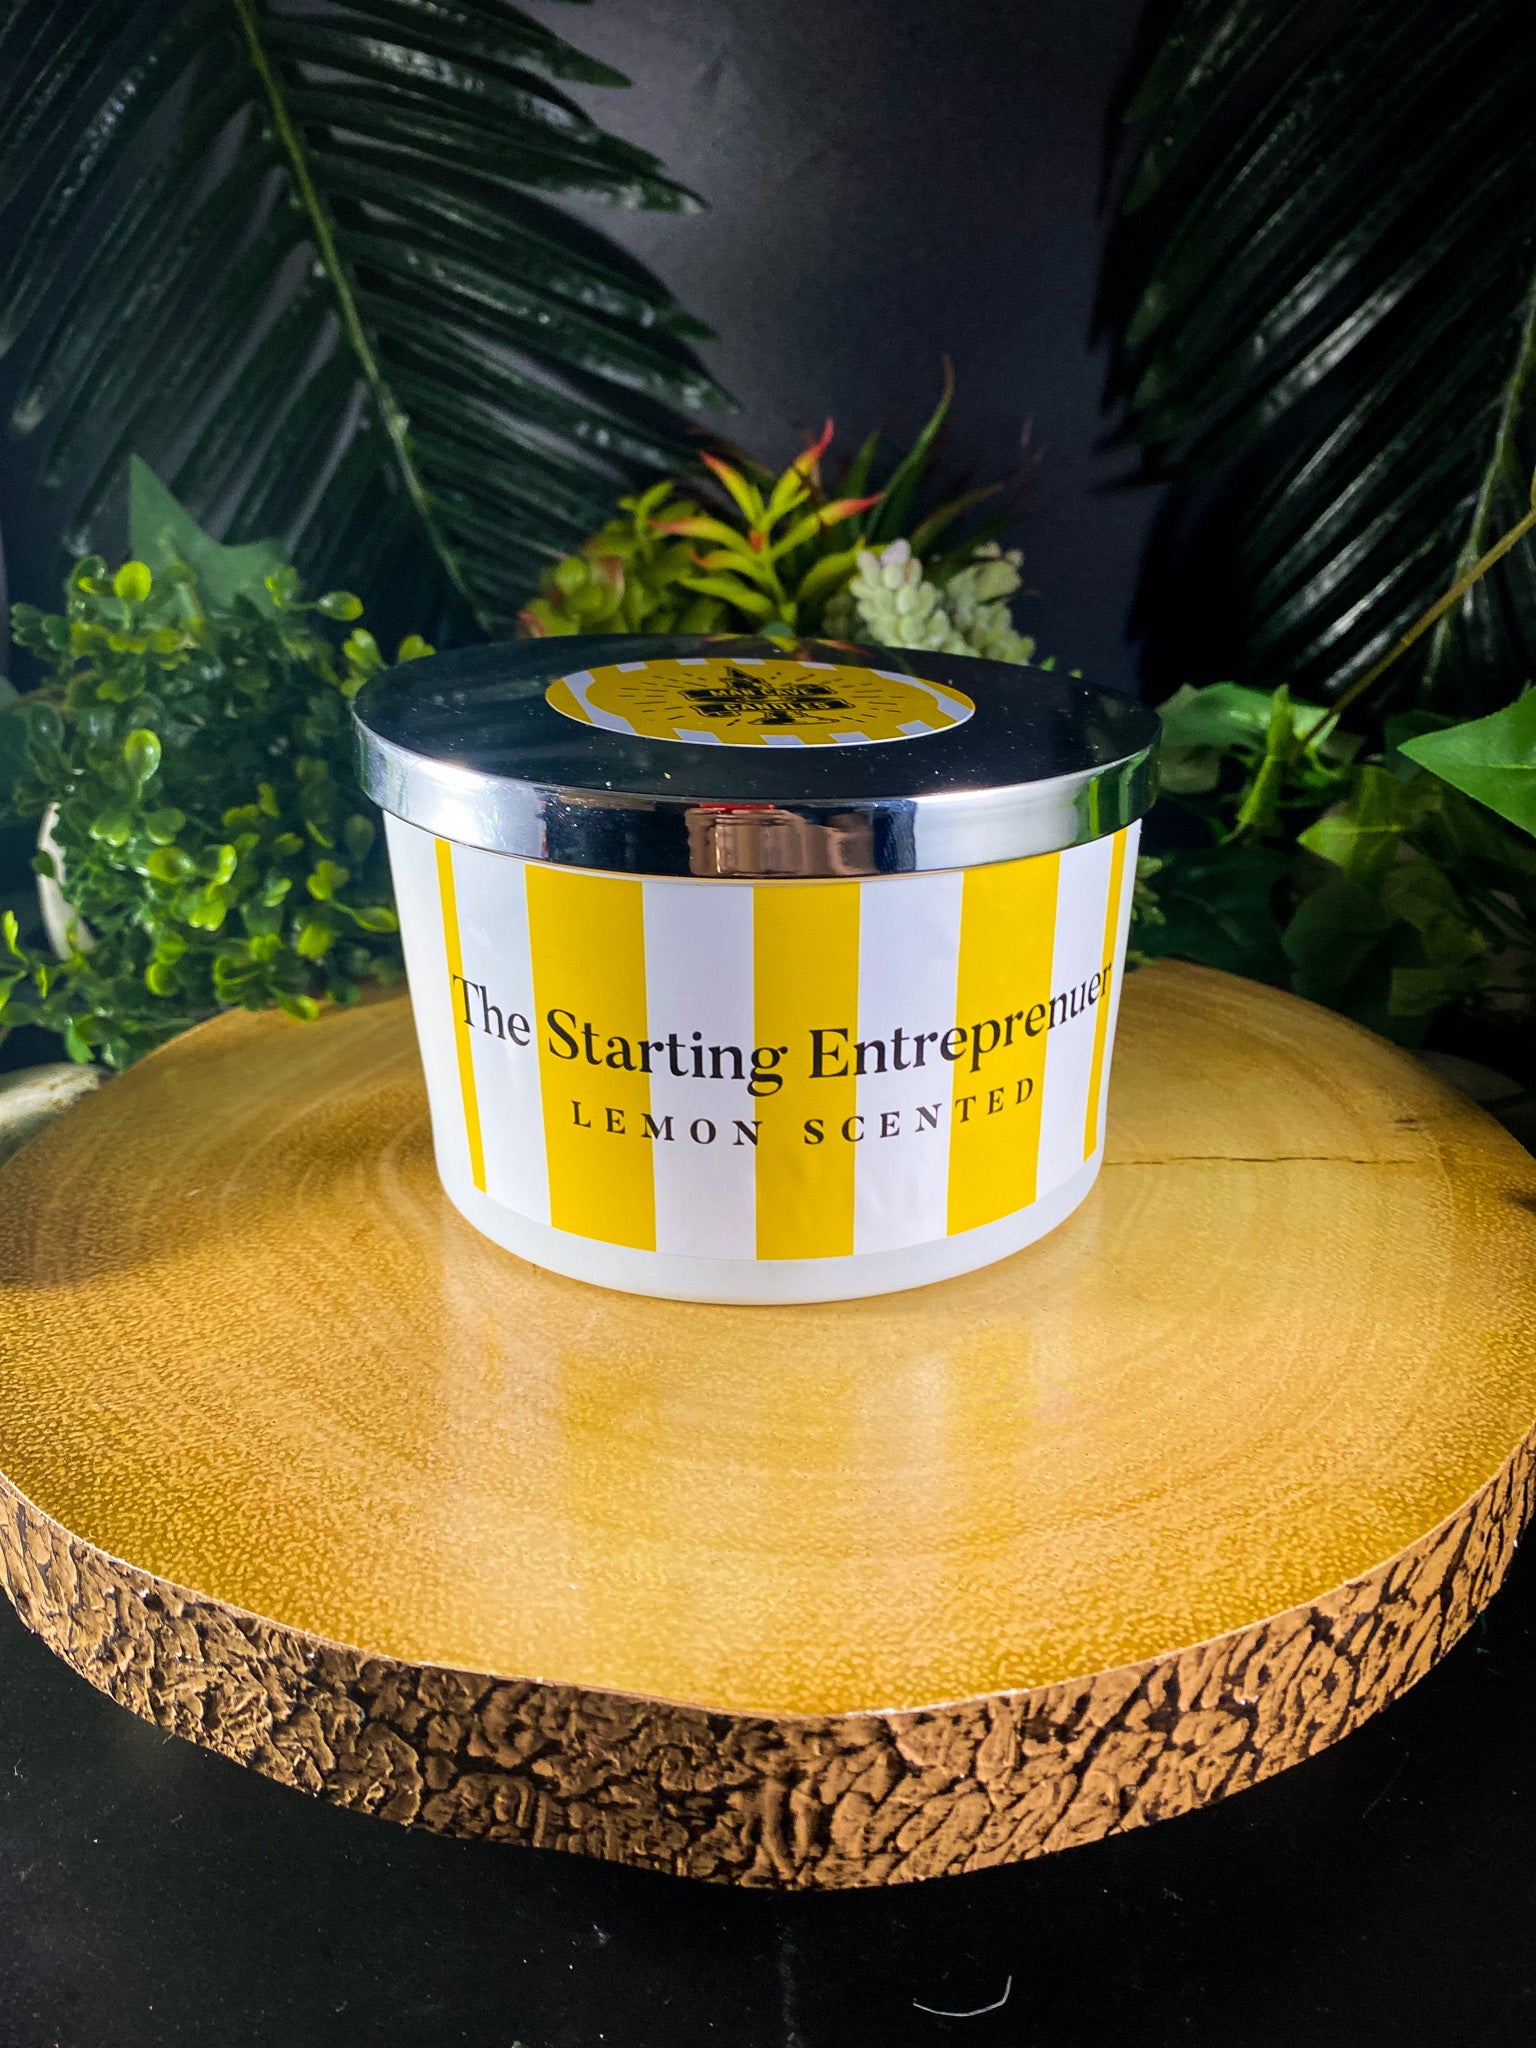 Starting Entreprenuer - Lemon Scented Man Cave Candle